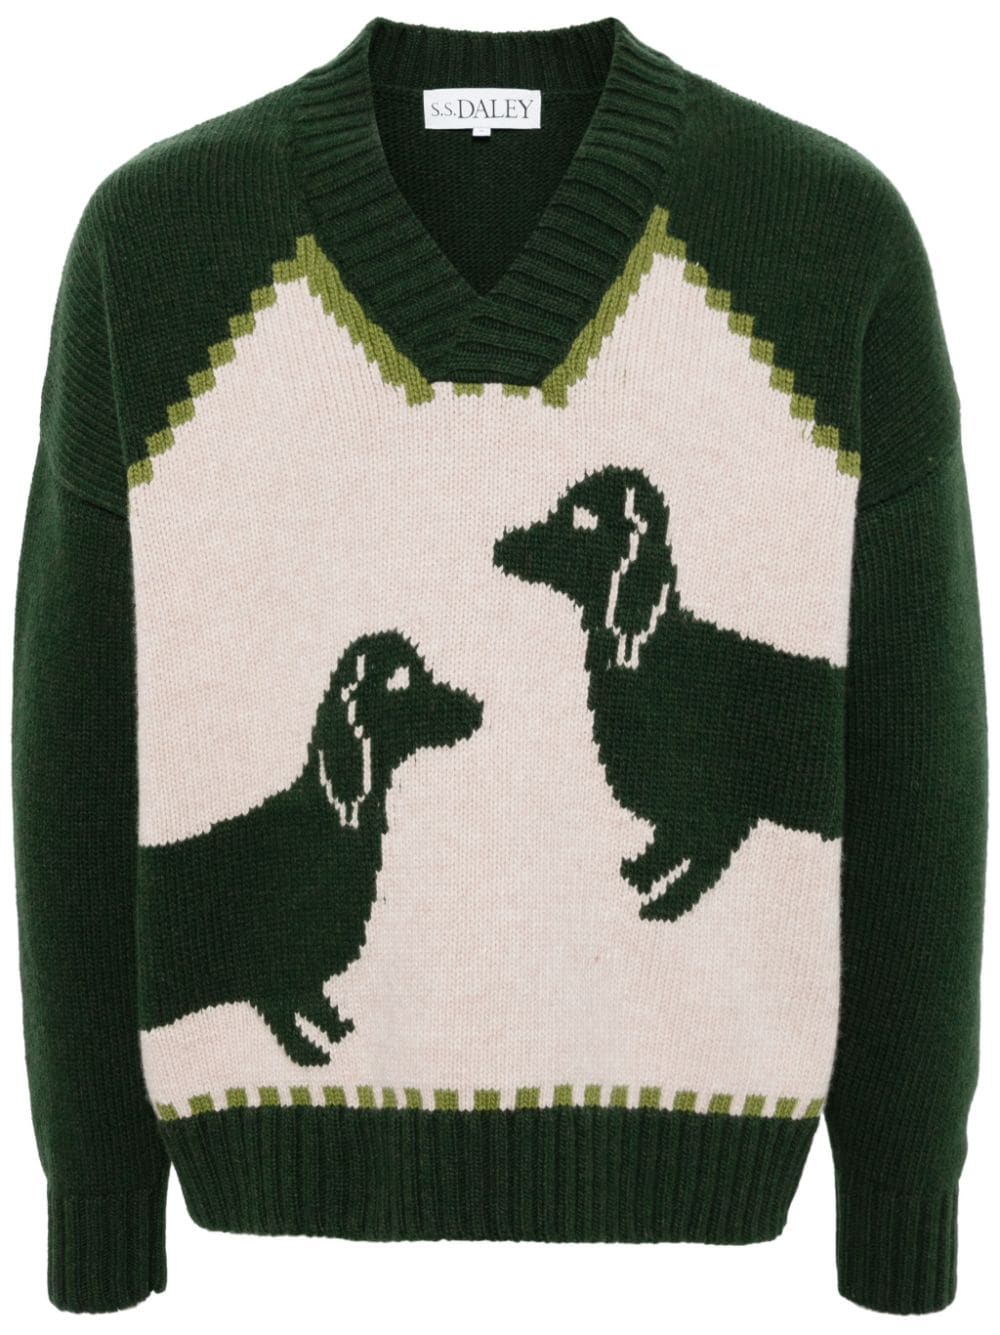 S.S.DALEY Harold wool jumper - Green von S.S.DALEY